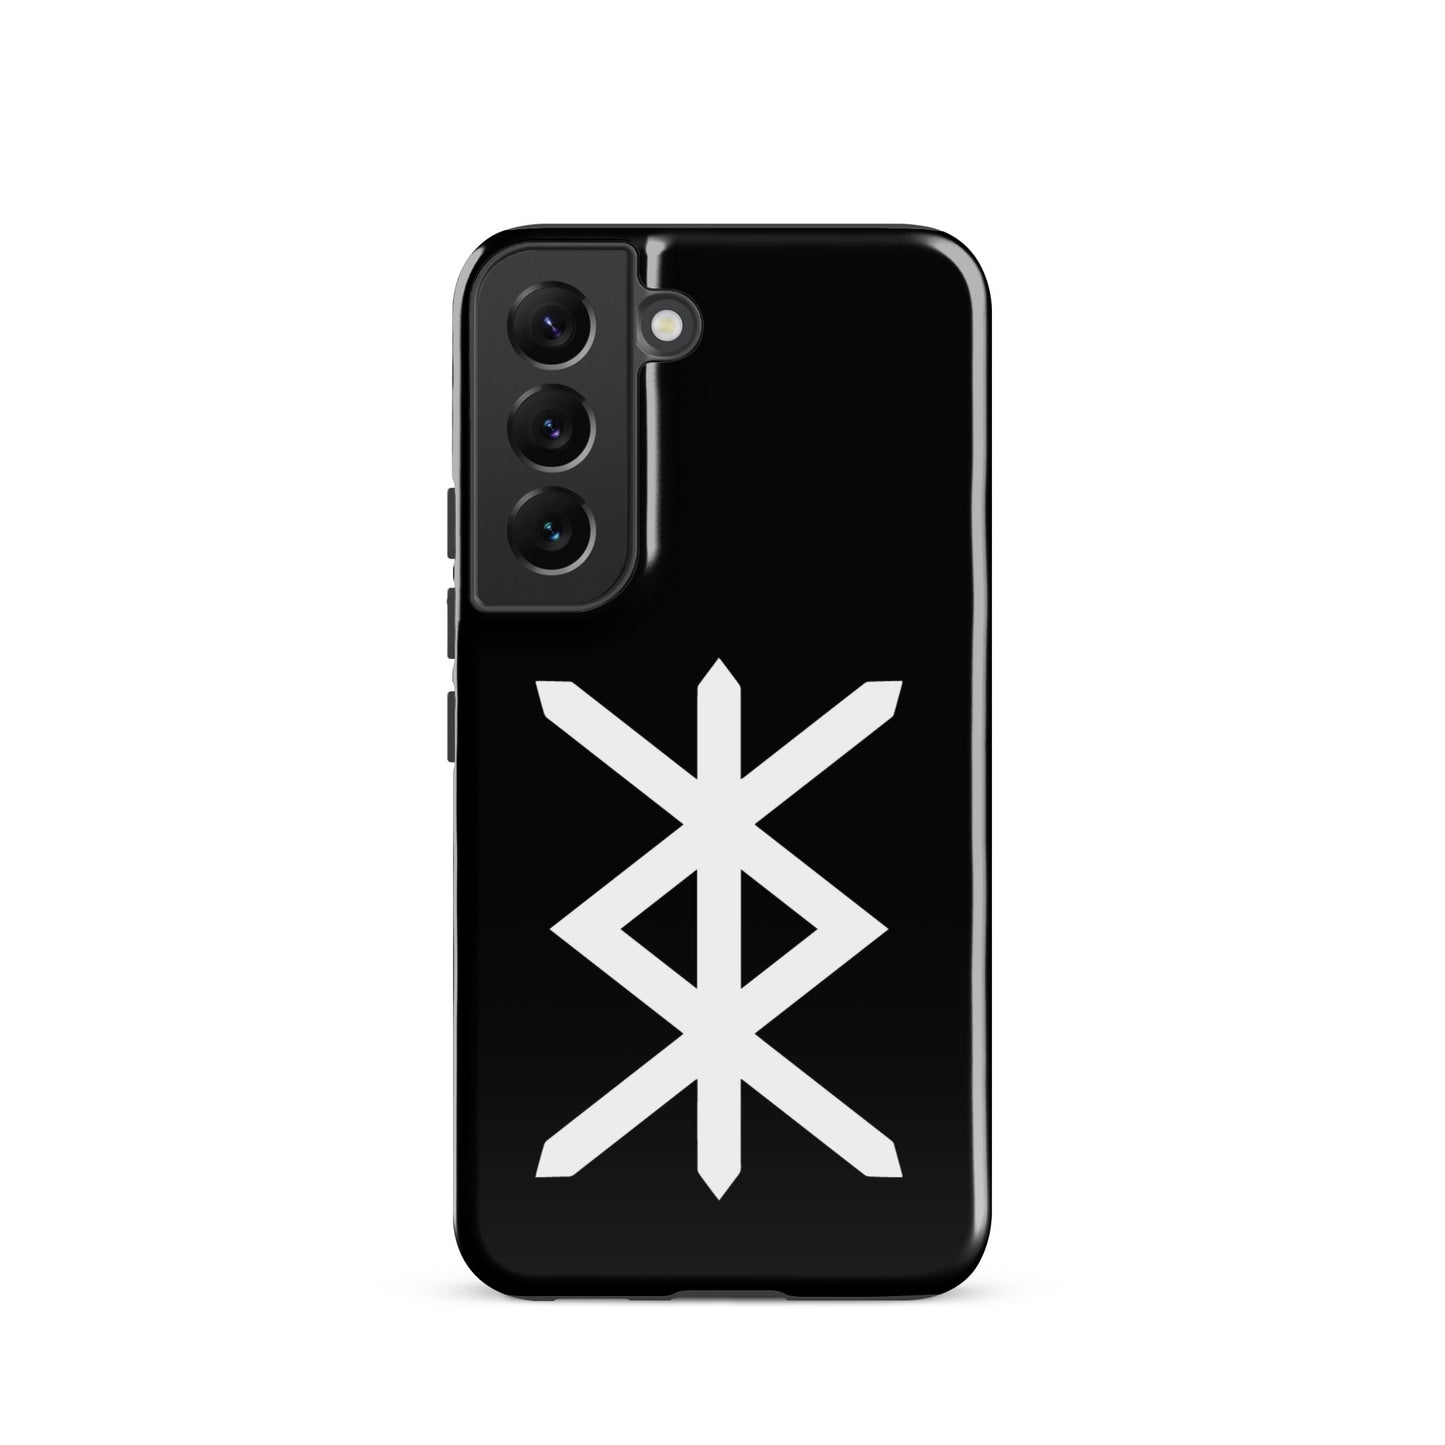 Protection Bind Rune Tough case for Samsung®